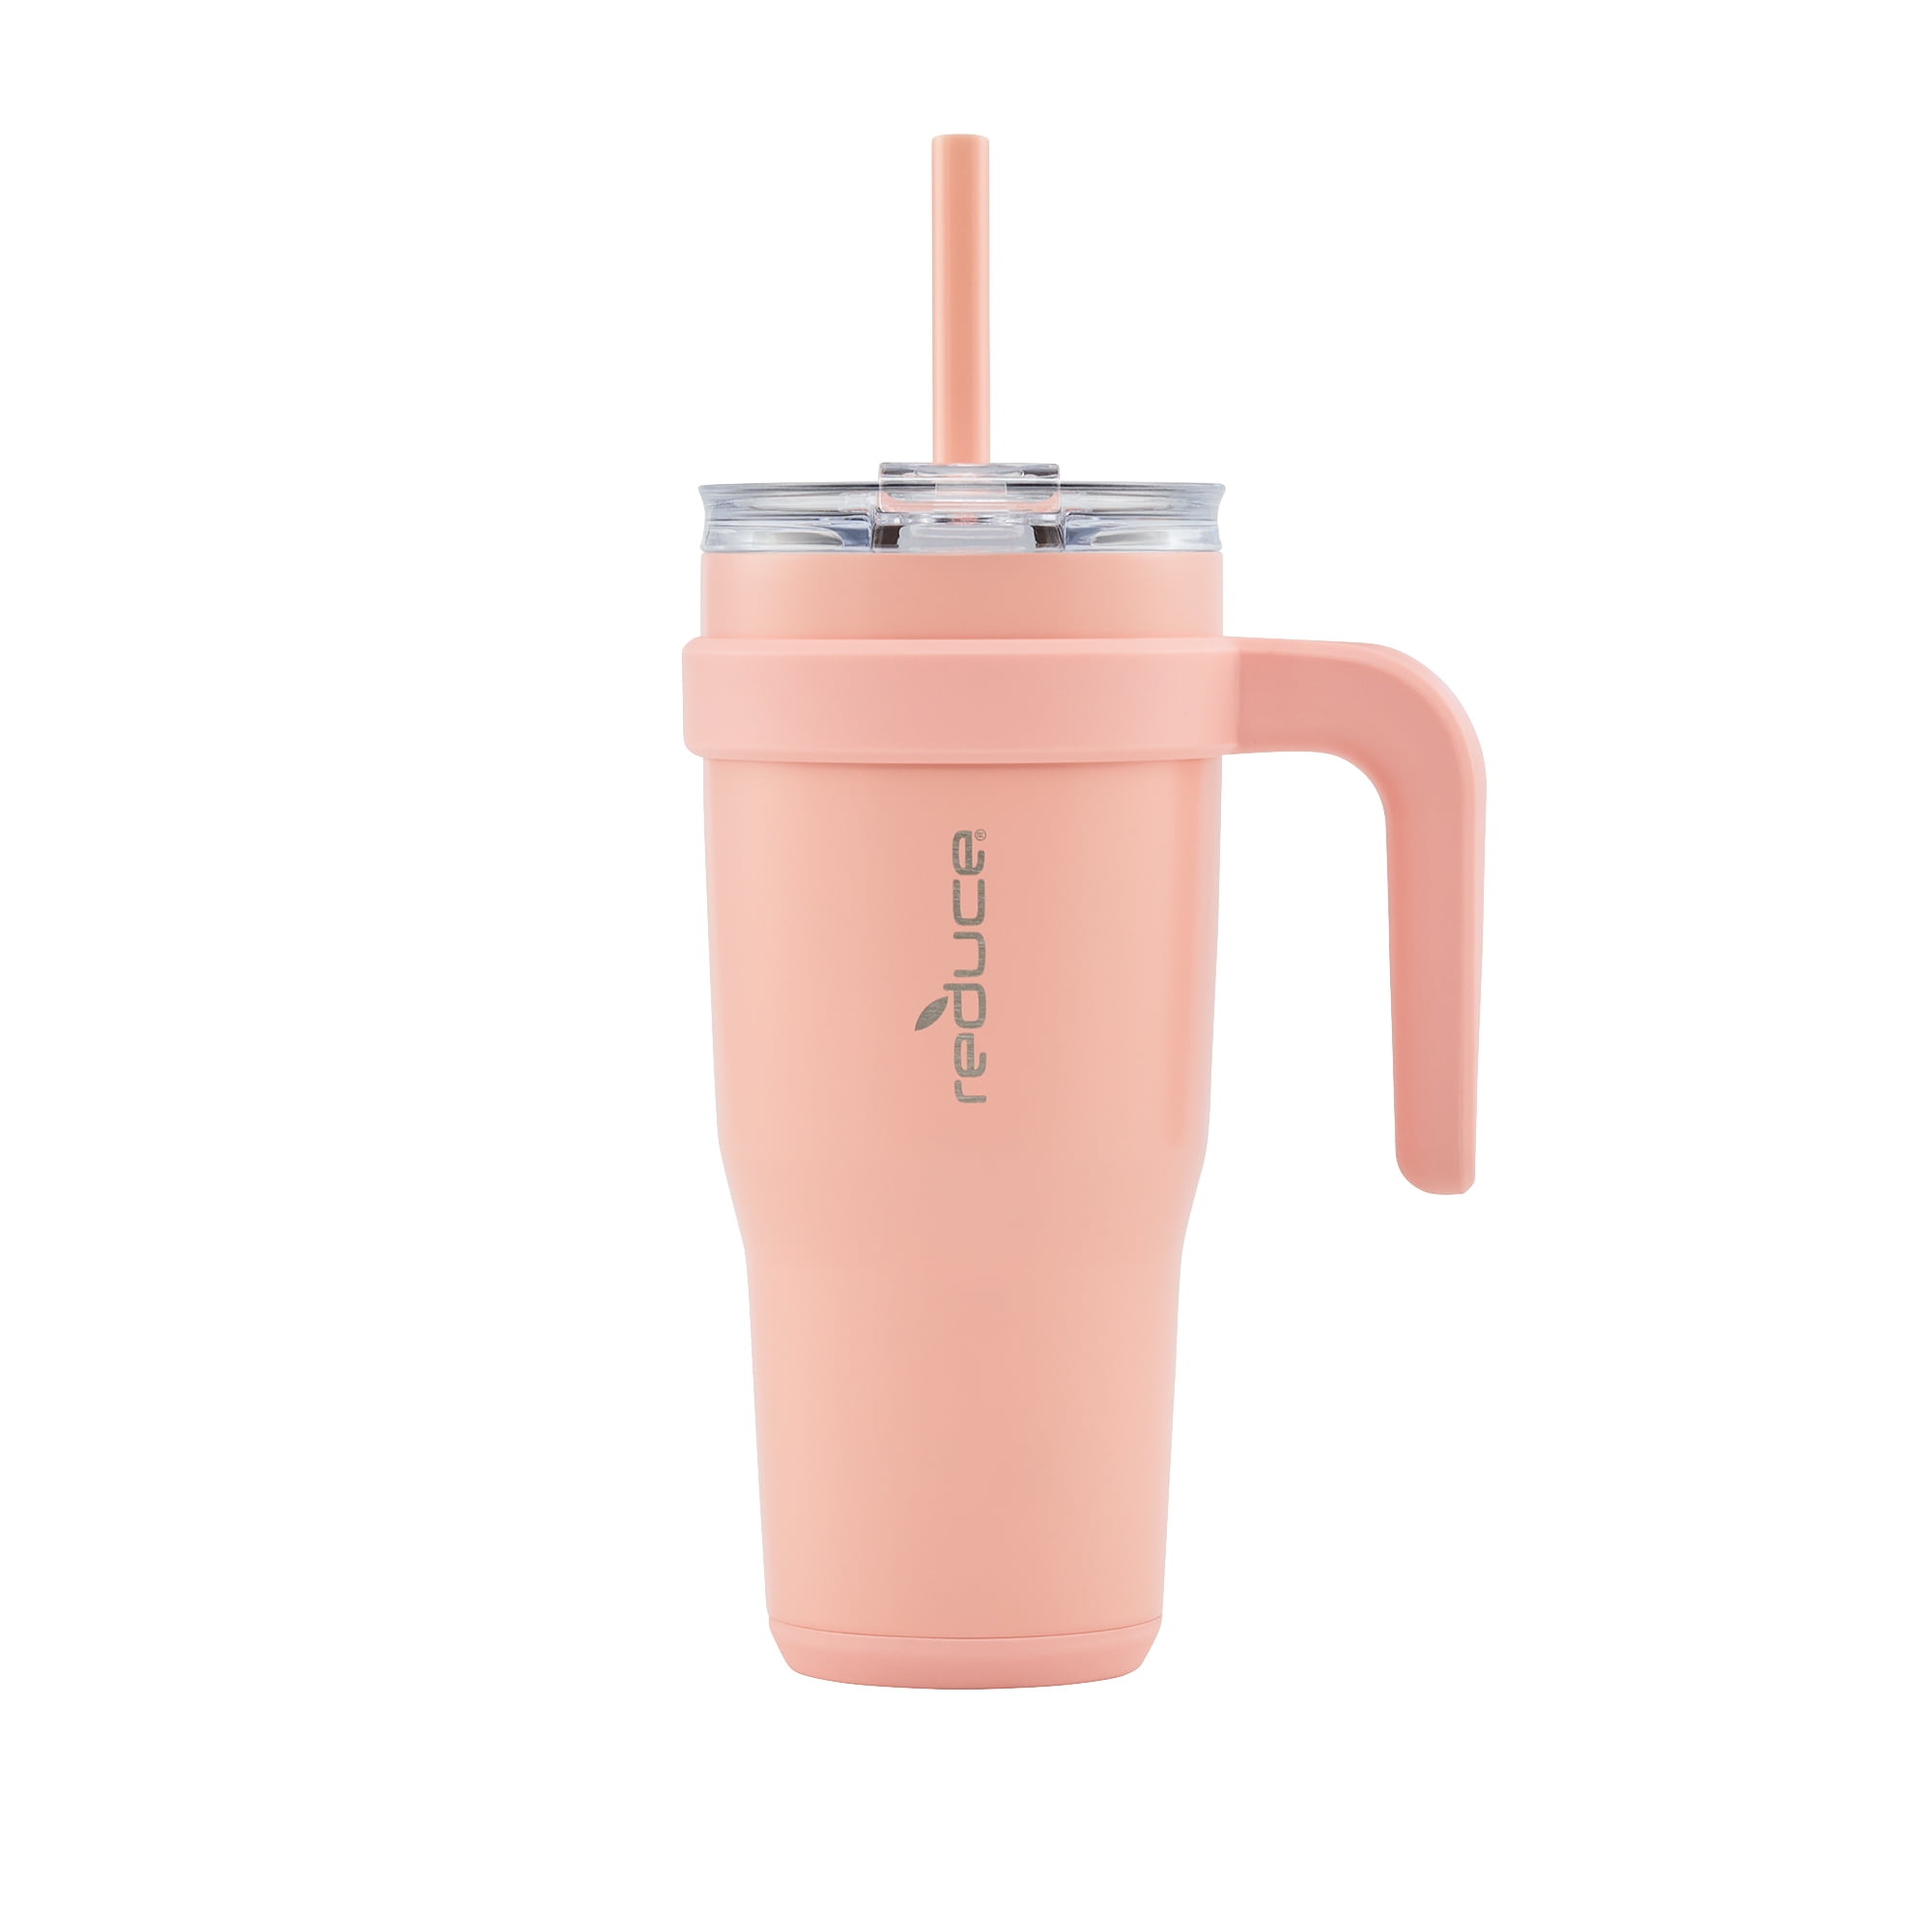 Customizable Sippy Cup Handle for Stanley 14oz Tumbler Improved